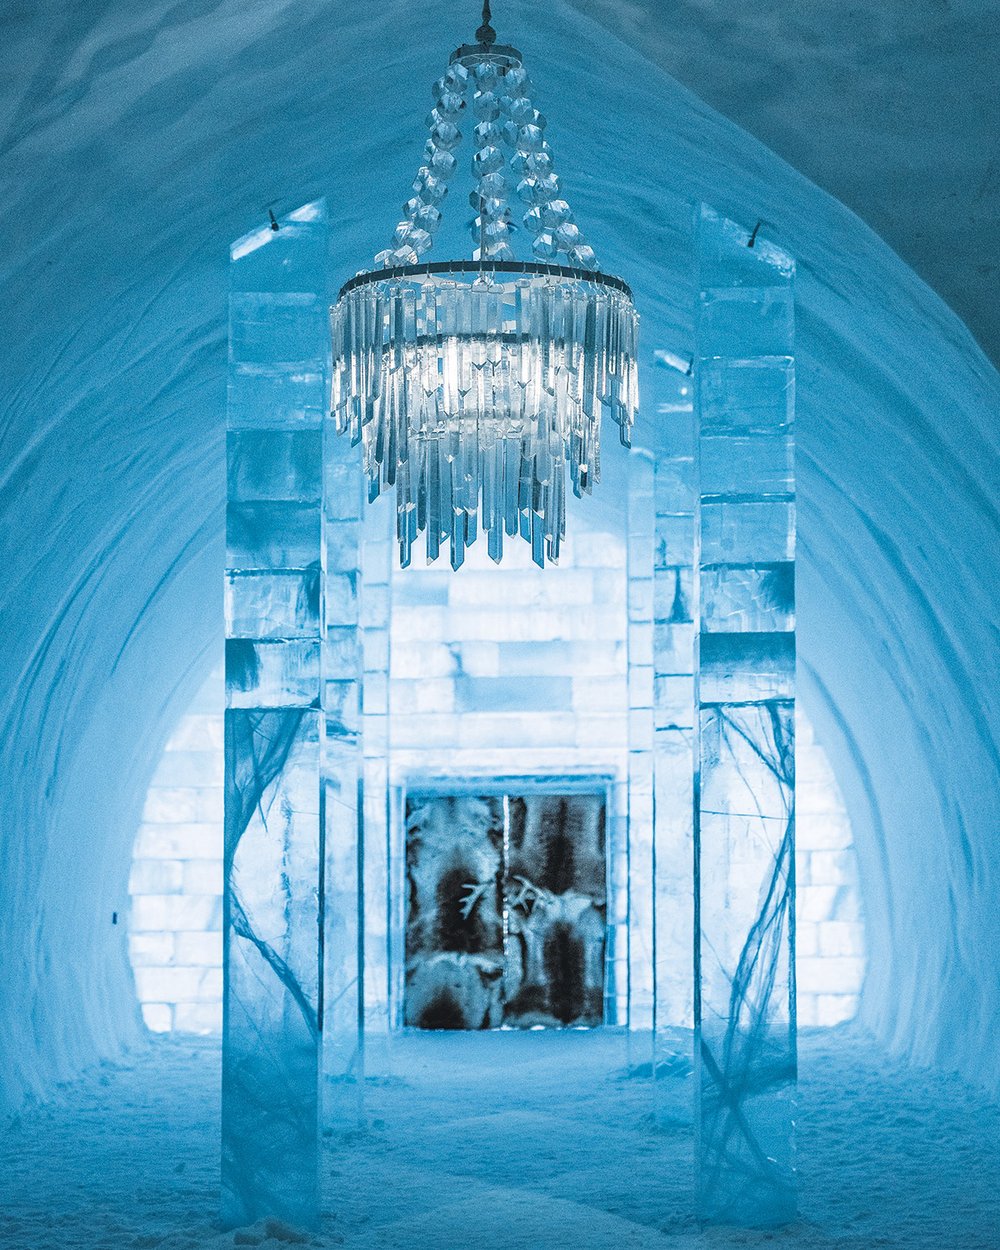 A corridor with a chandelier leads to a door, all made of ice.